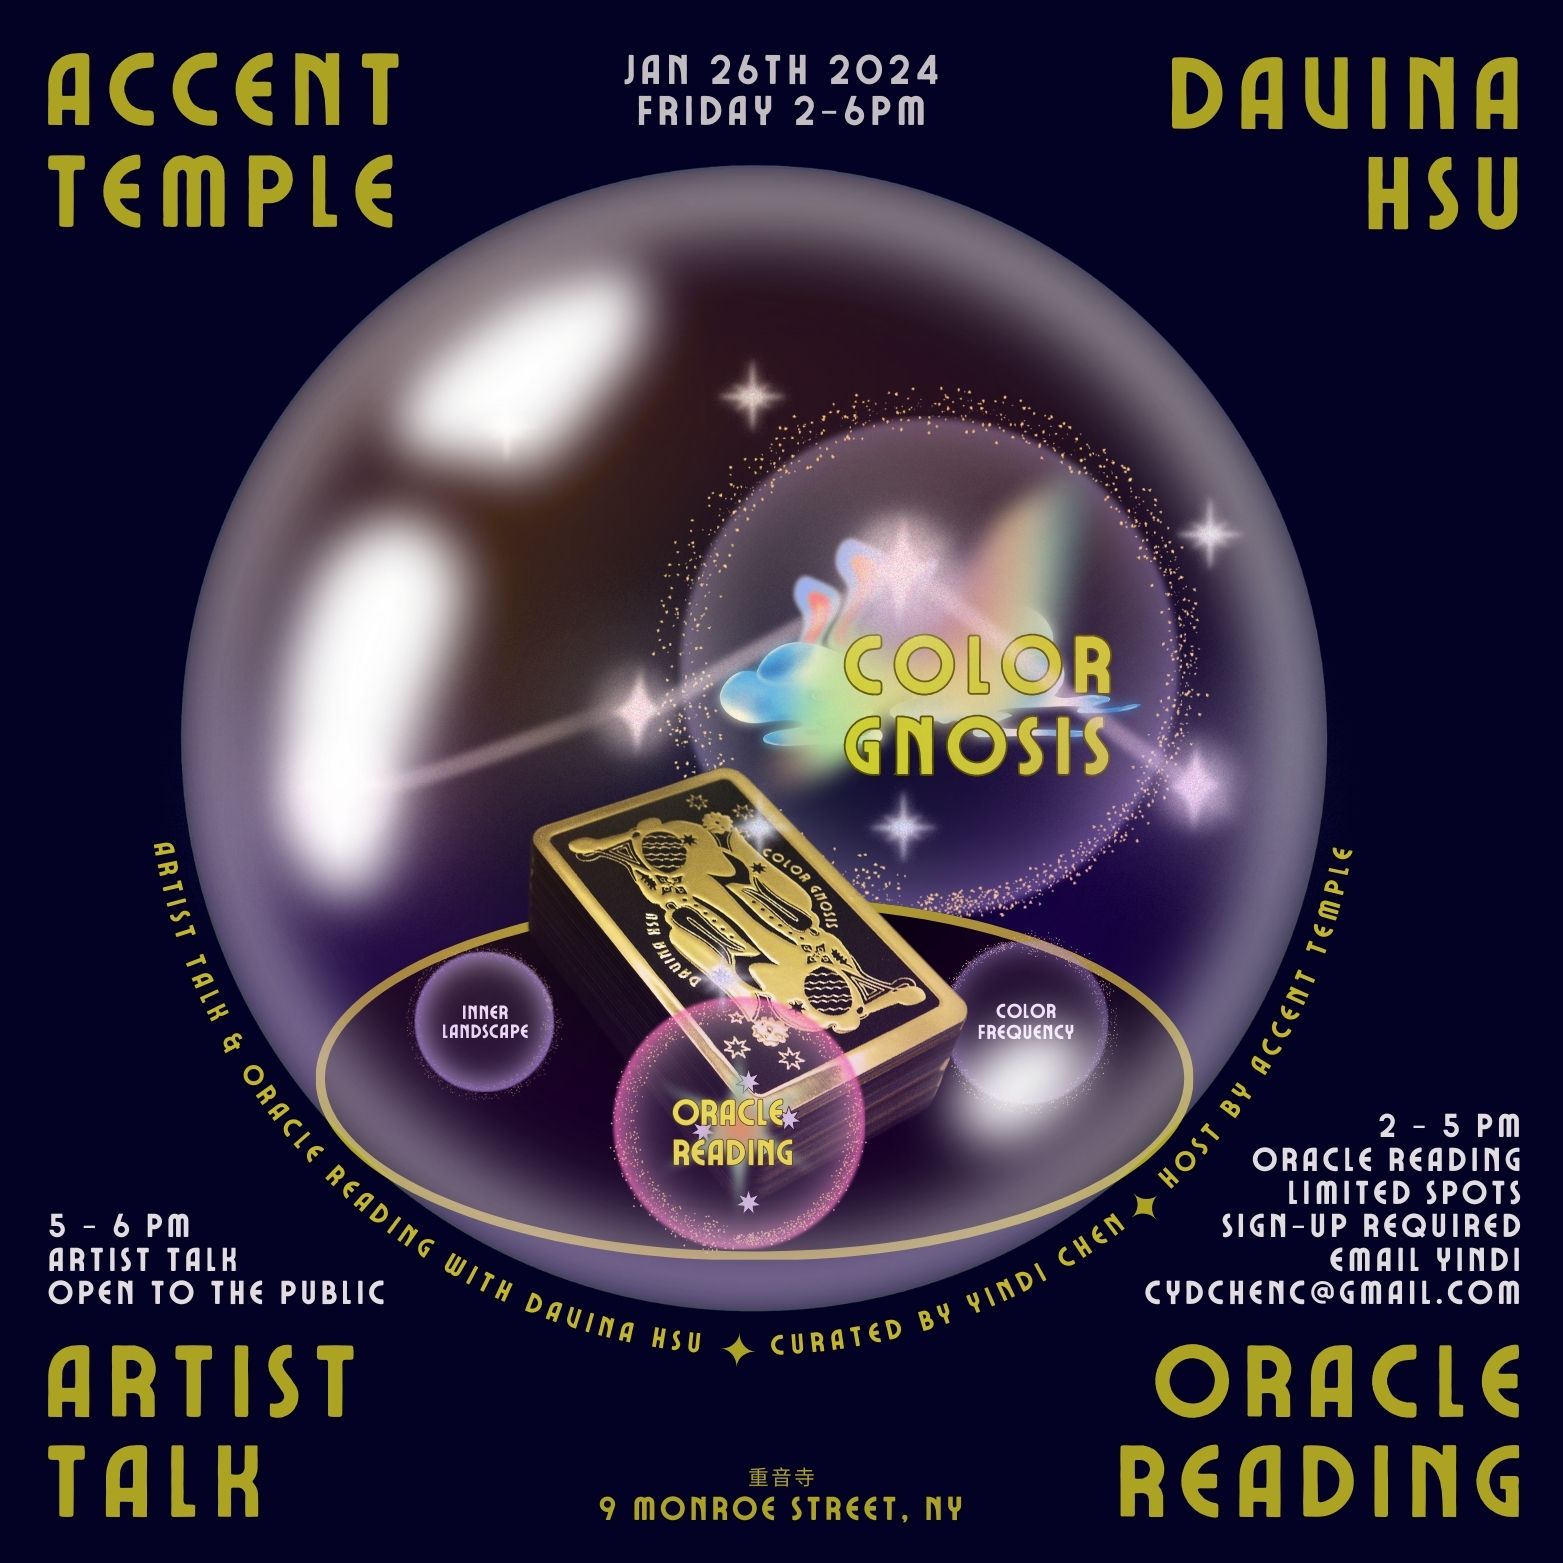 RSVP LINK: Color Gnosis Energy Oracle Reading and Artist Talk with Davina Hsu at Accent Temple thumbnail